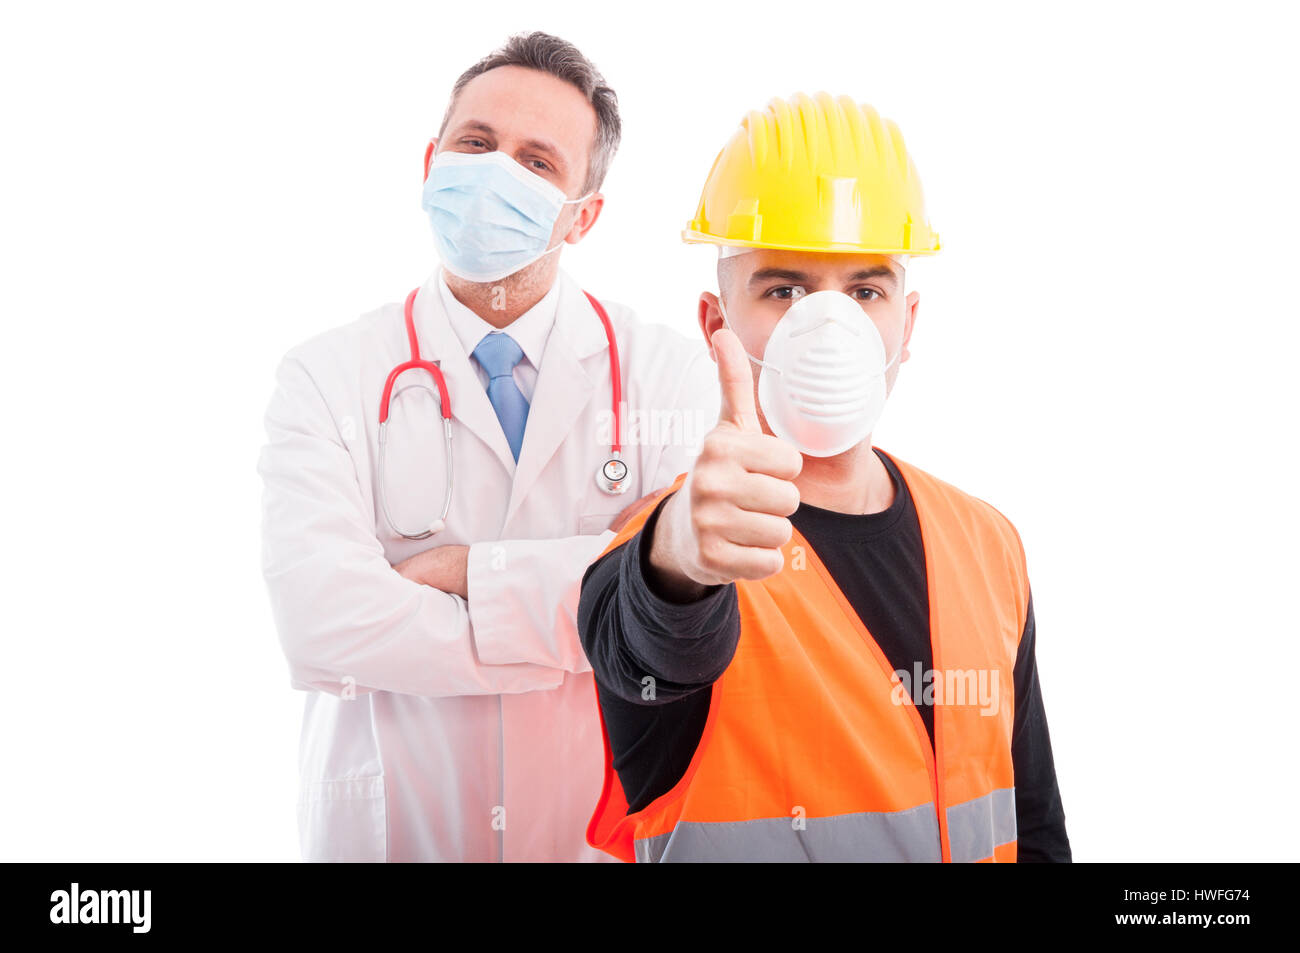 Trustworthy constructor and doctor showing thumb up being confident isolated on white background Stock Photo